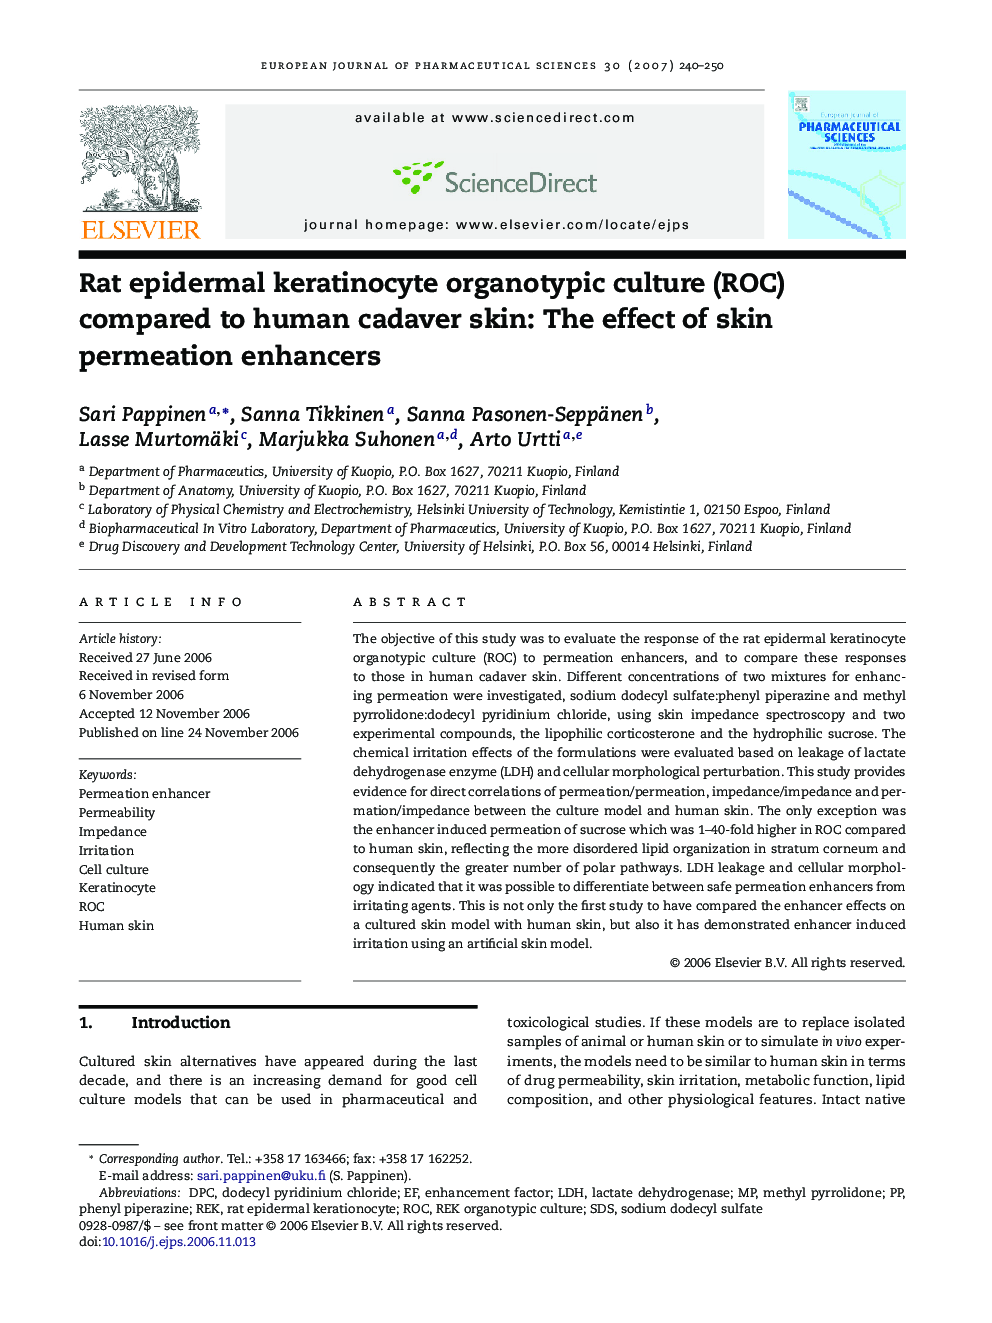 Rat epidermal keratinocyte organotypic culture (ROC) compared to human cadaver skin: The effect of skin permeation enhancers